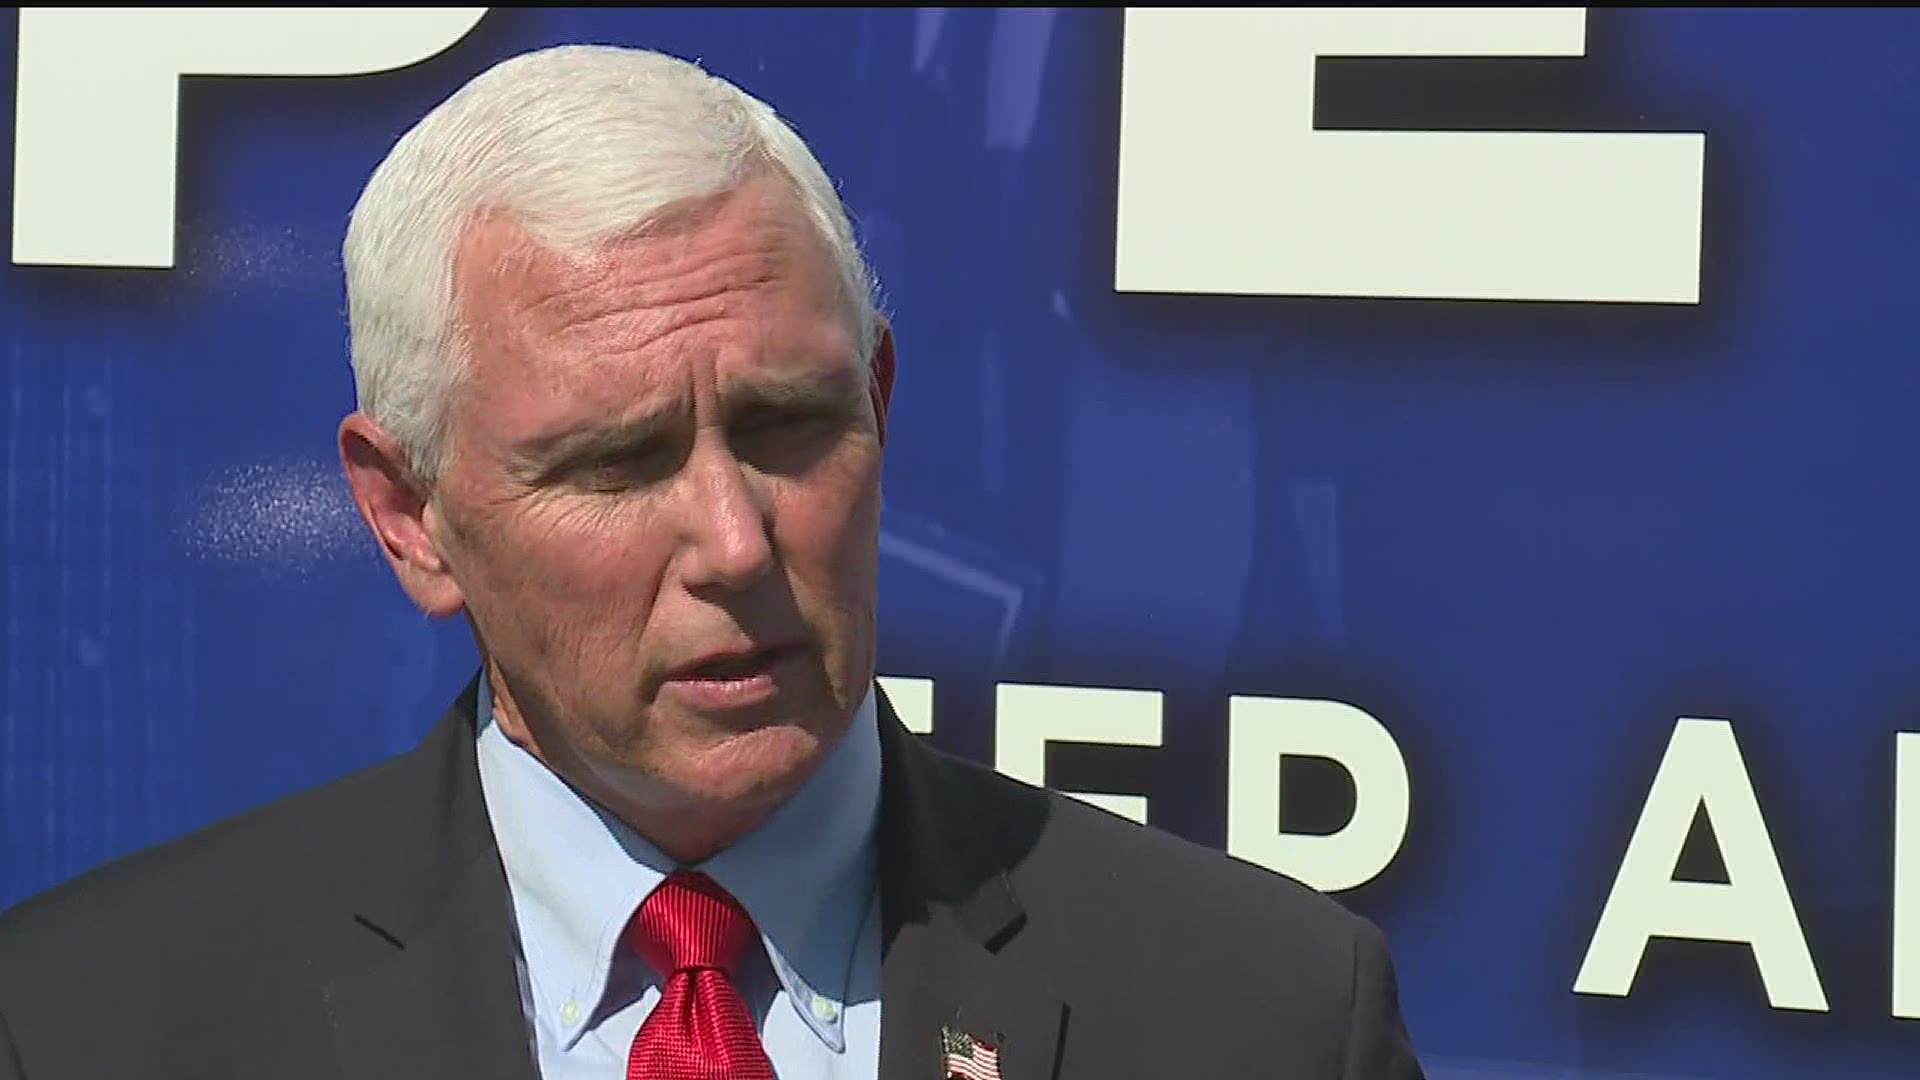 FOX43 spoke one-on-one with Vice President Pence on pressing issues in Pennsylvania.